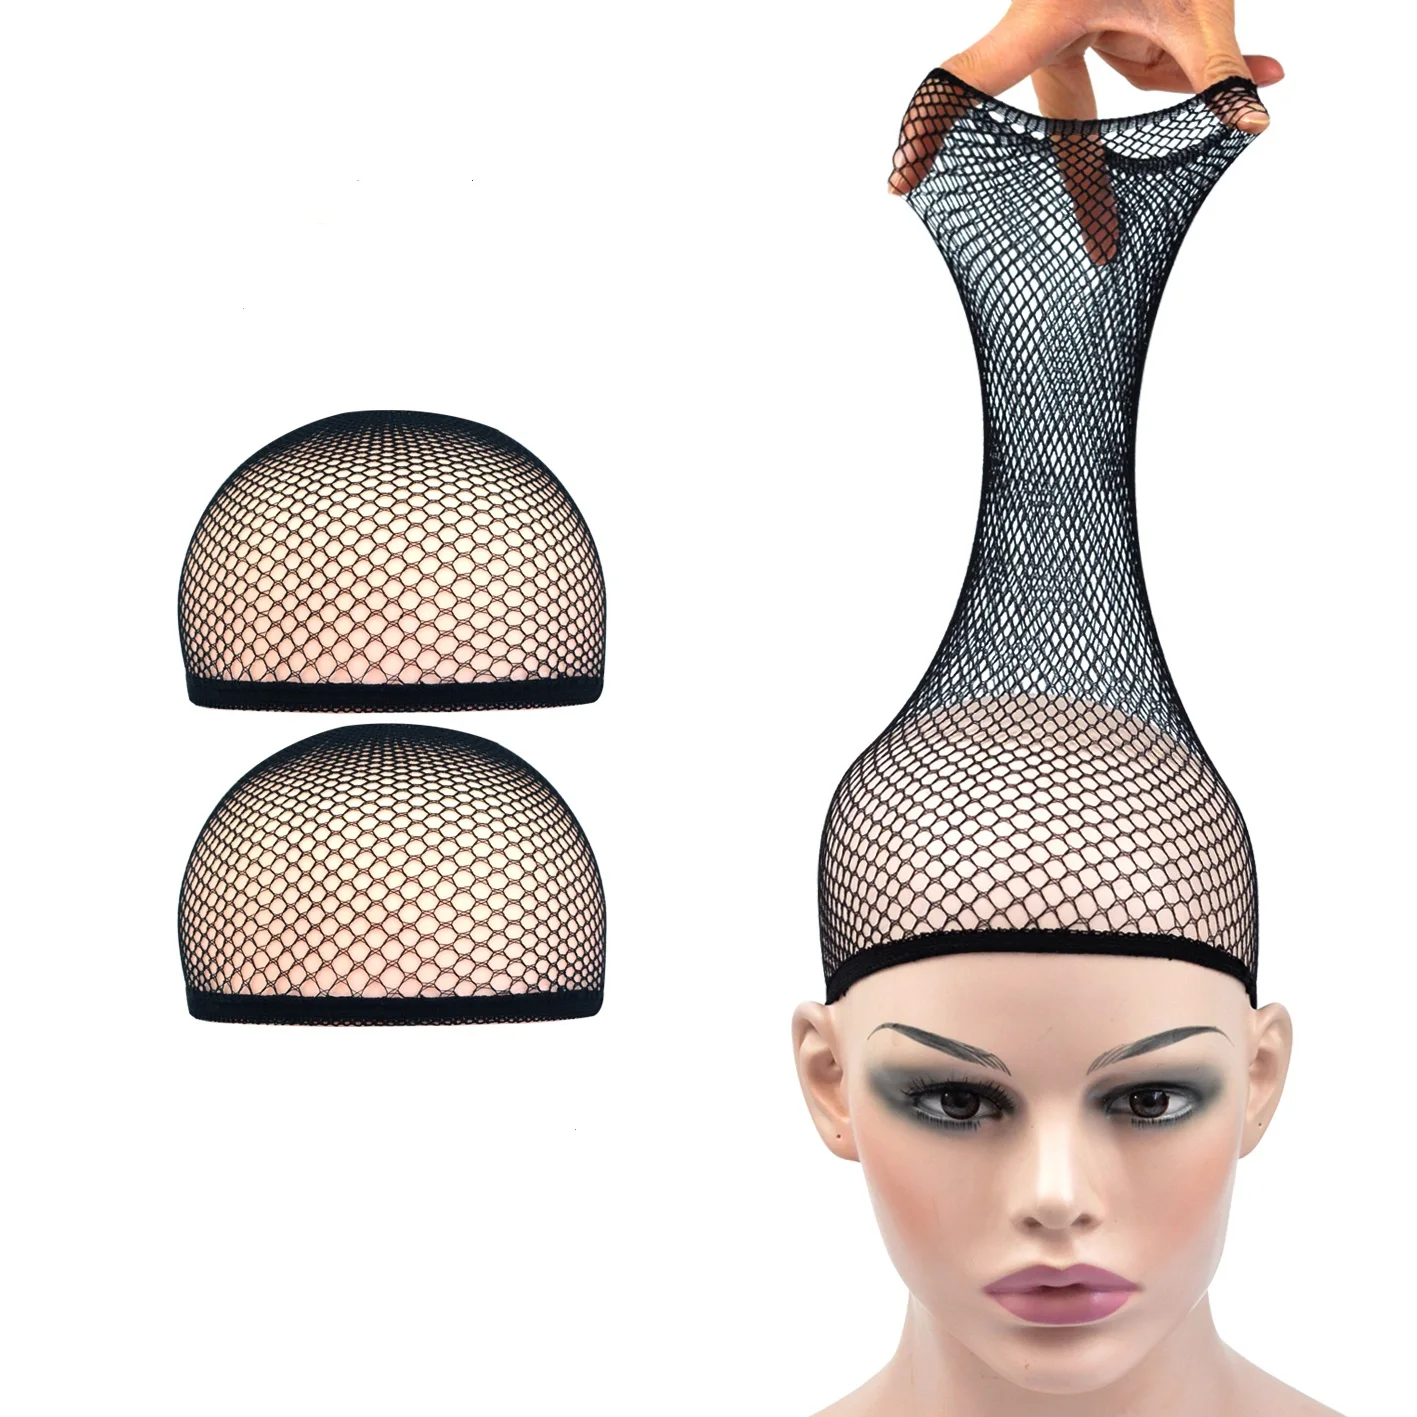 

2 Pieces Hair Nets Mesh Stocking Caps Weaving Wig Hairnet Open Ended Wig Cap for Women